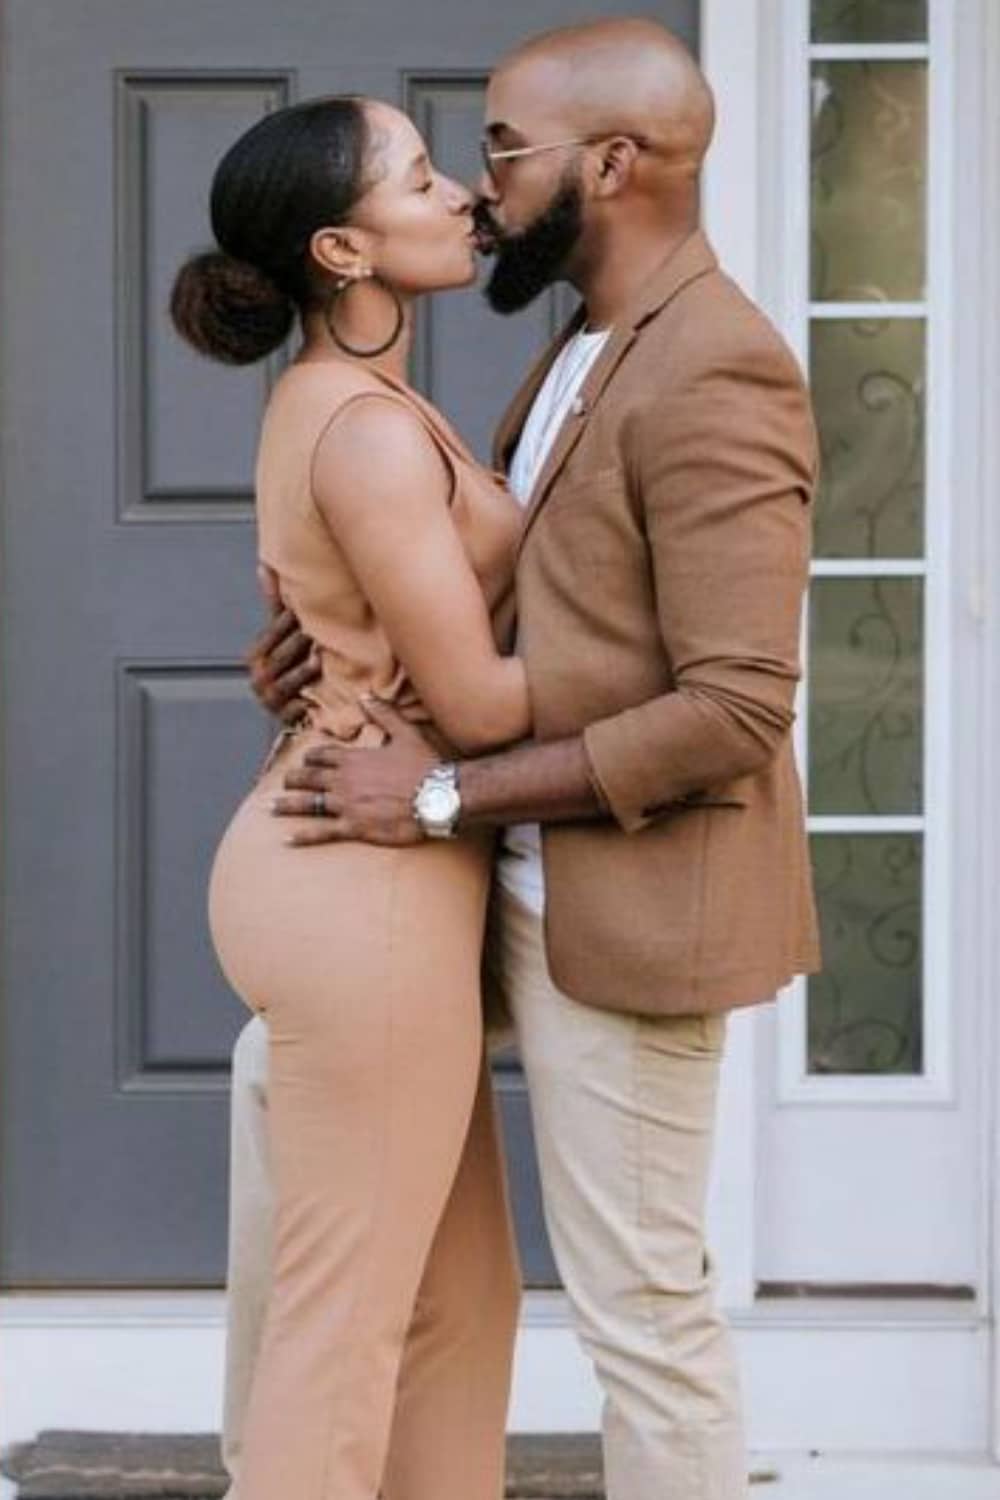 "If love birds like Banky and Adesua can break up, I'll never believe in love again - Nigerian lady cries out